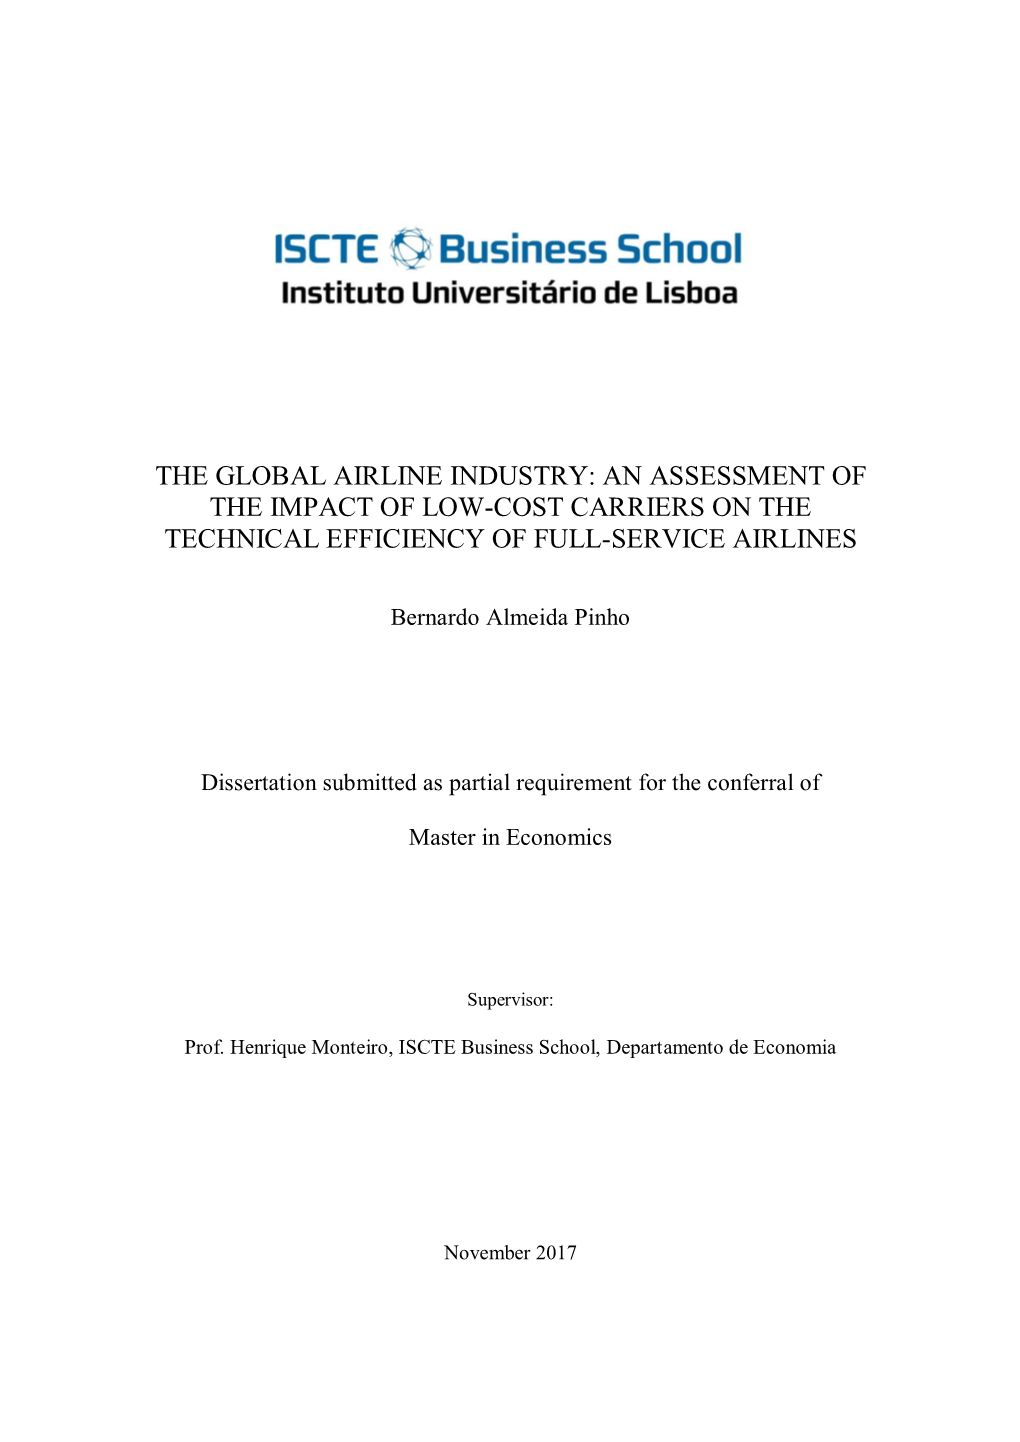 The Global Airline Industry: an Assessment of the Impact of Low-Cost Carriers on the Technical Efficiency of Full-Service Airlines